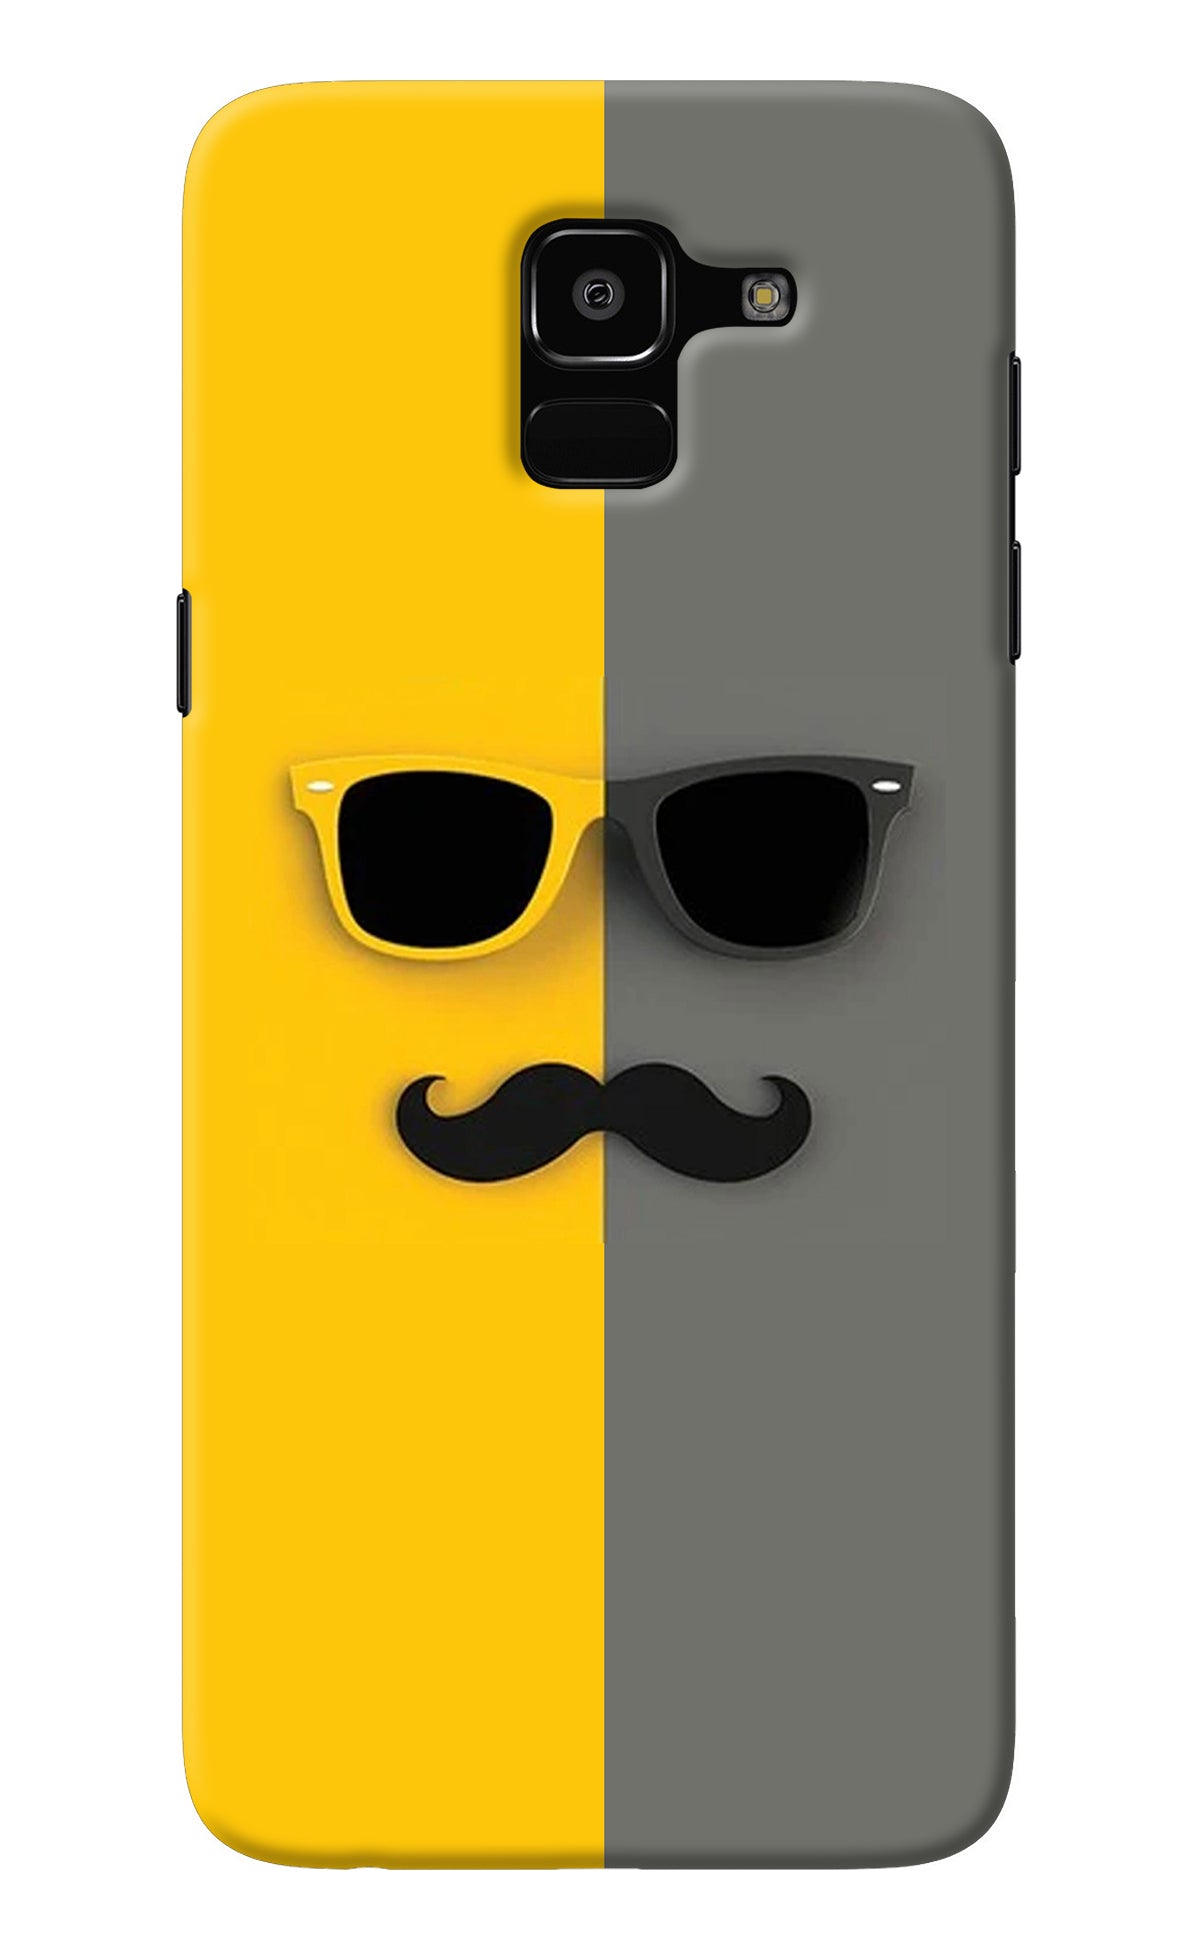 Sunglasses with Mustache Samsung J6 Back Cover